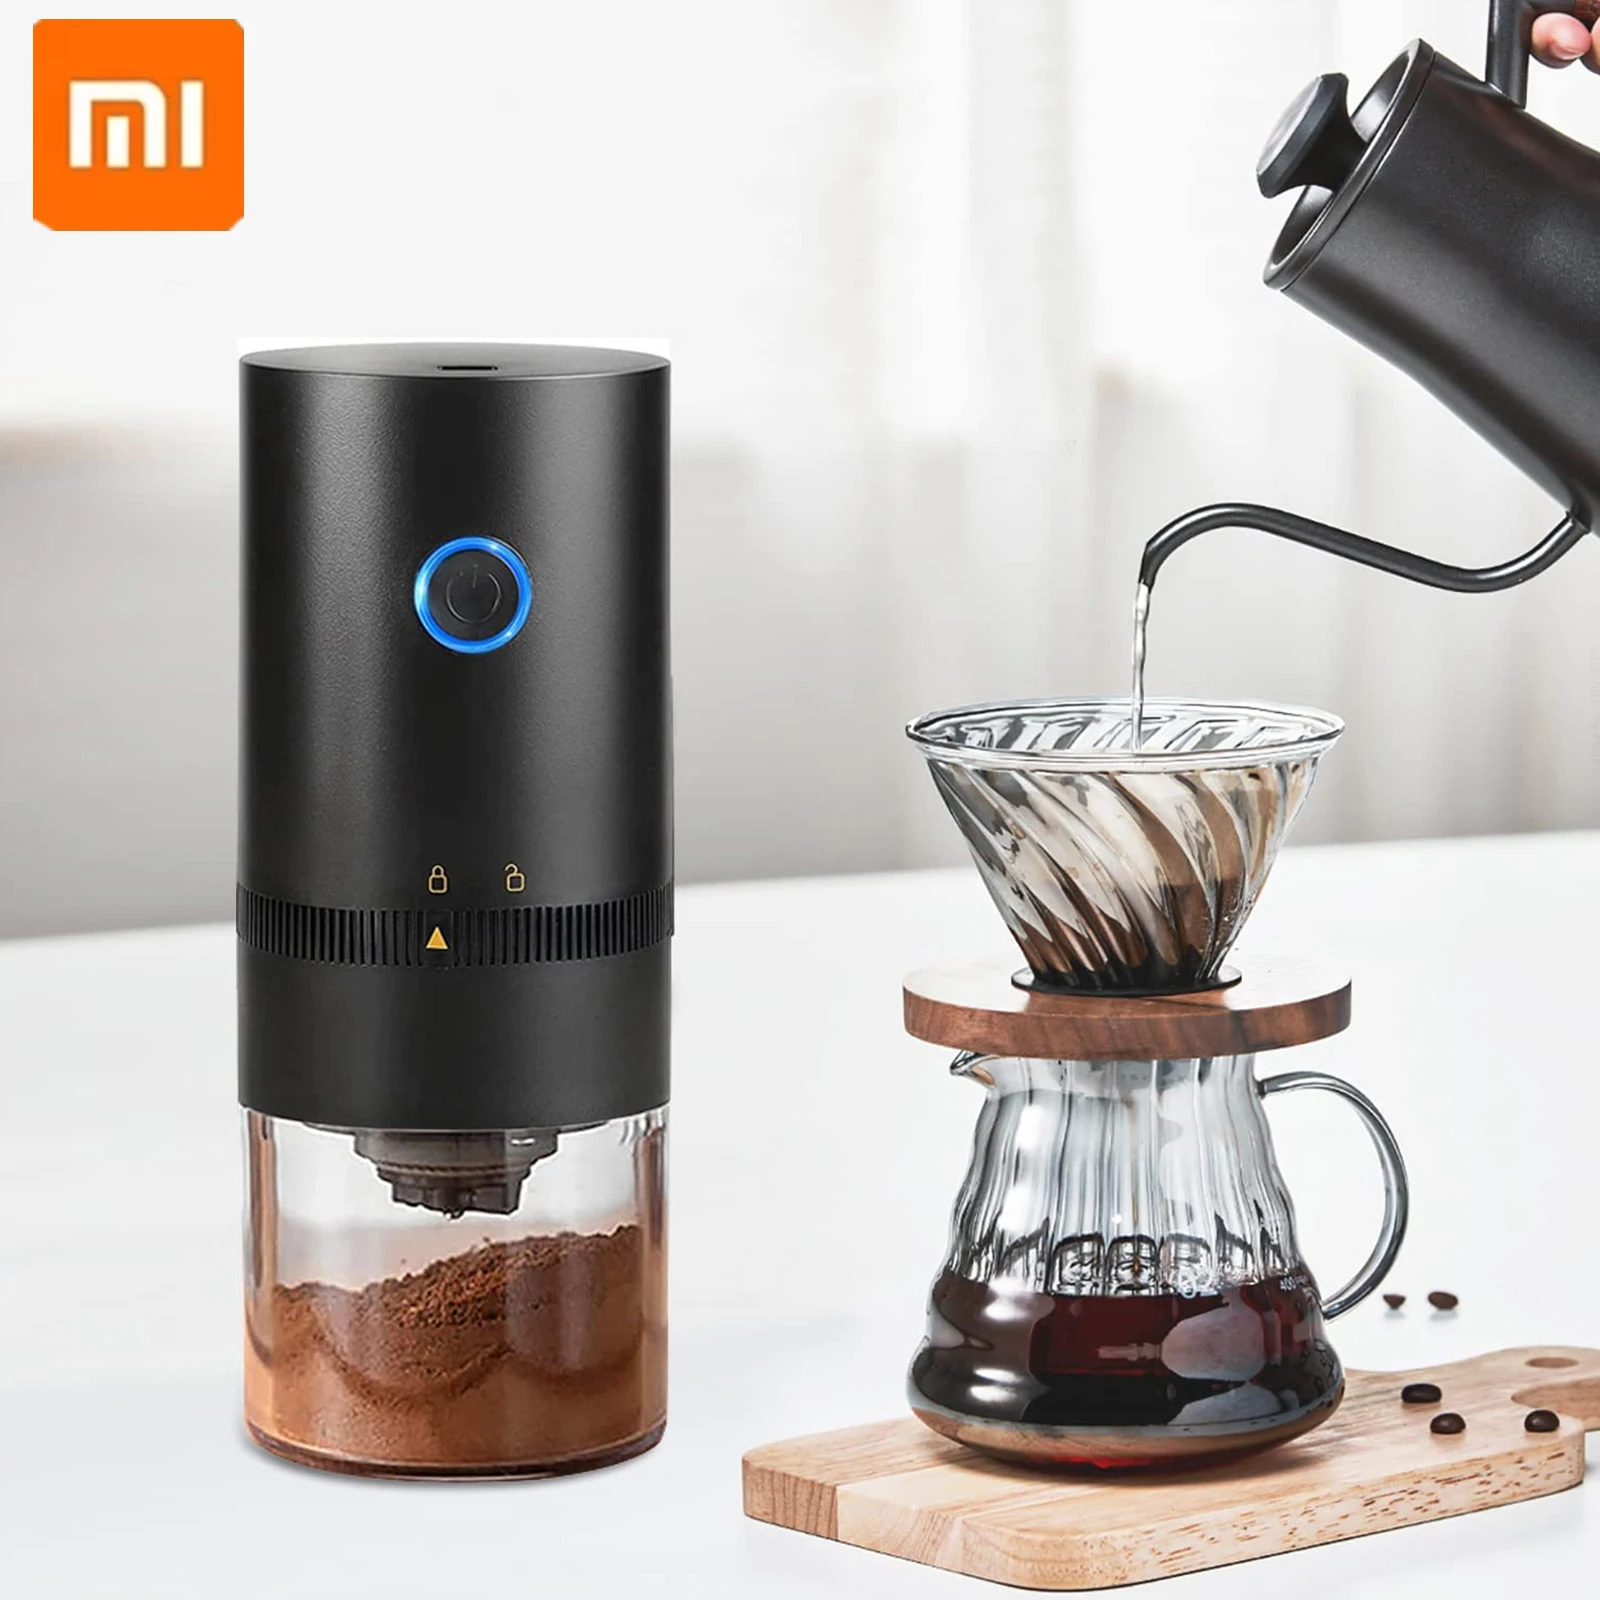 Xiaomi Coffee Grinder Machine Usb Portable Electric Spice Mill Coffee Grinder Maker Molinillo Cafe Coffee Grinder Electric New - Coffee Grinders - AliExpress